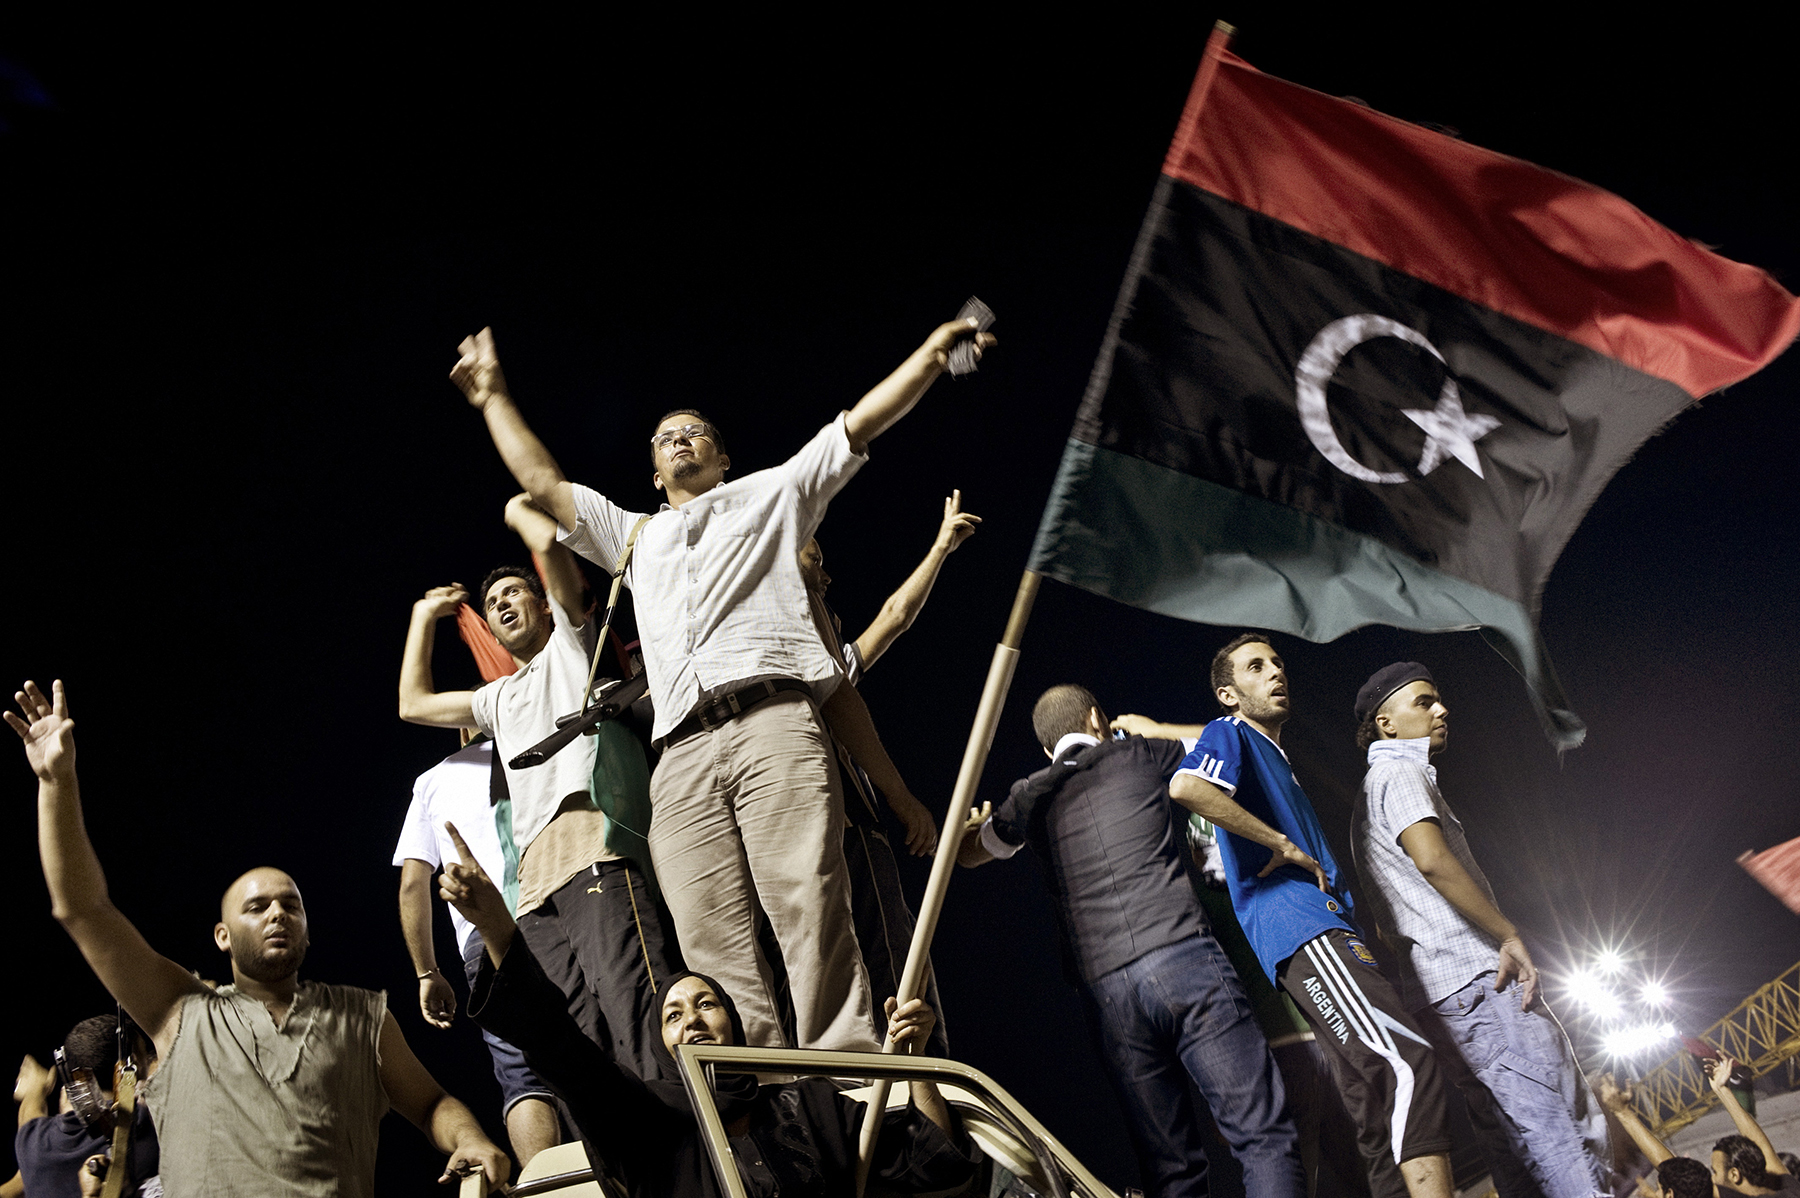  Rebels celebrate in Tripoli's iconic Green Square on August 24, 2011, shortly after breaking into Col. Muammar Gaddaf's Bab al-Aziziya compound for the first time. After six months of gruesome--yet often unmoving--front lines, the rebel victory in t